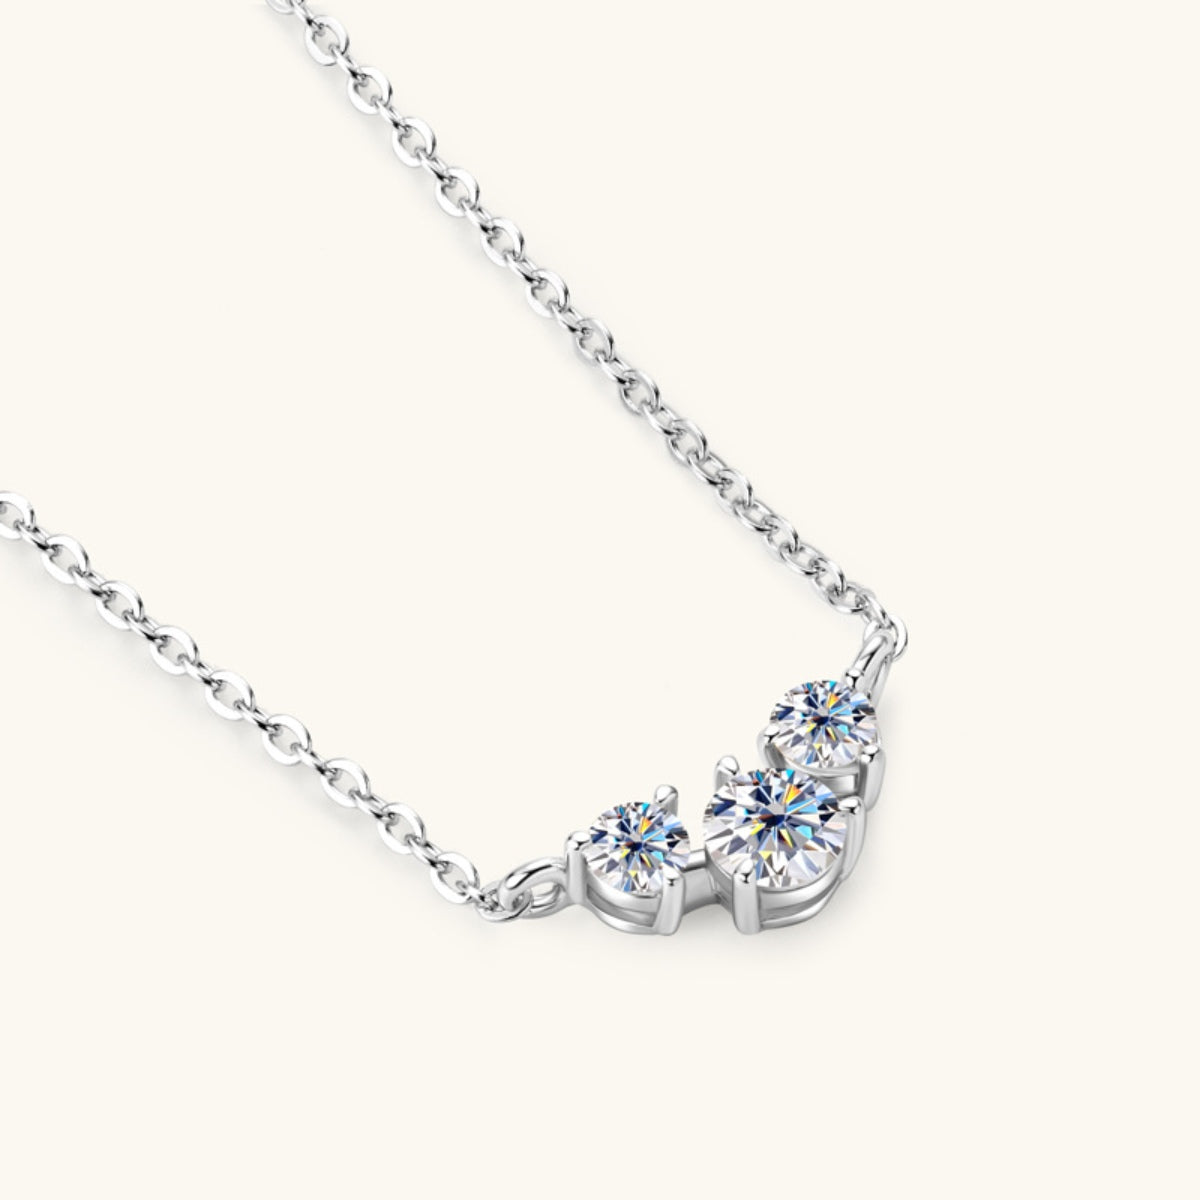 Inlaid Moissanite Necklace